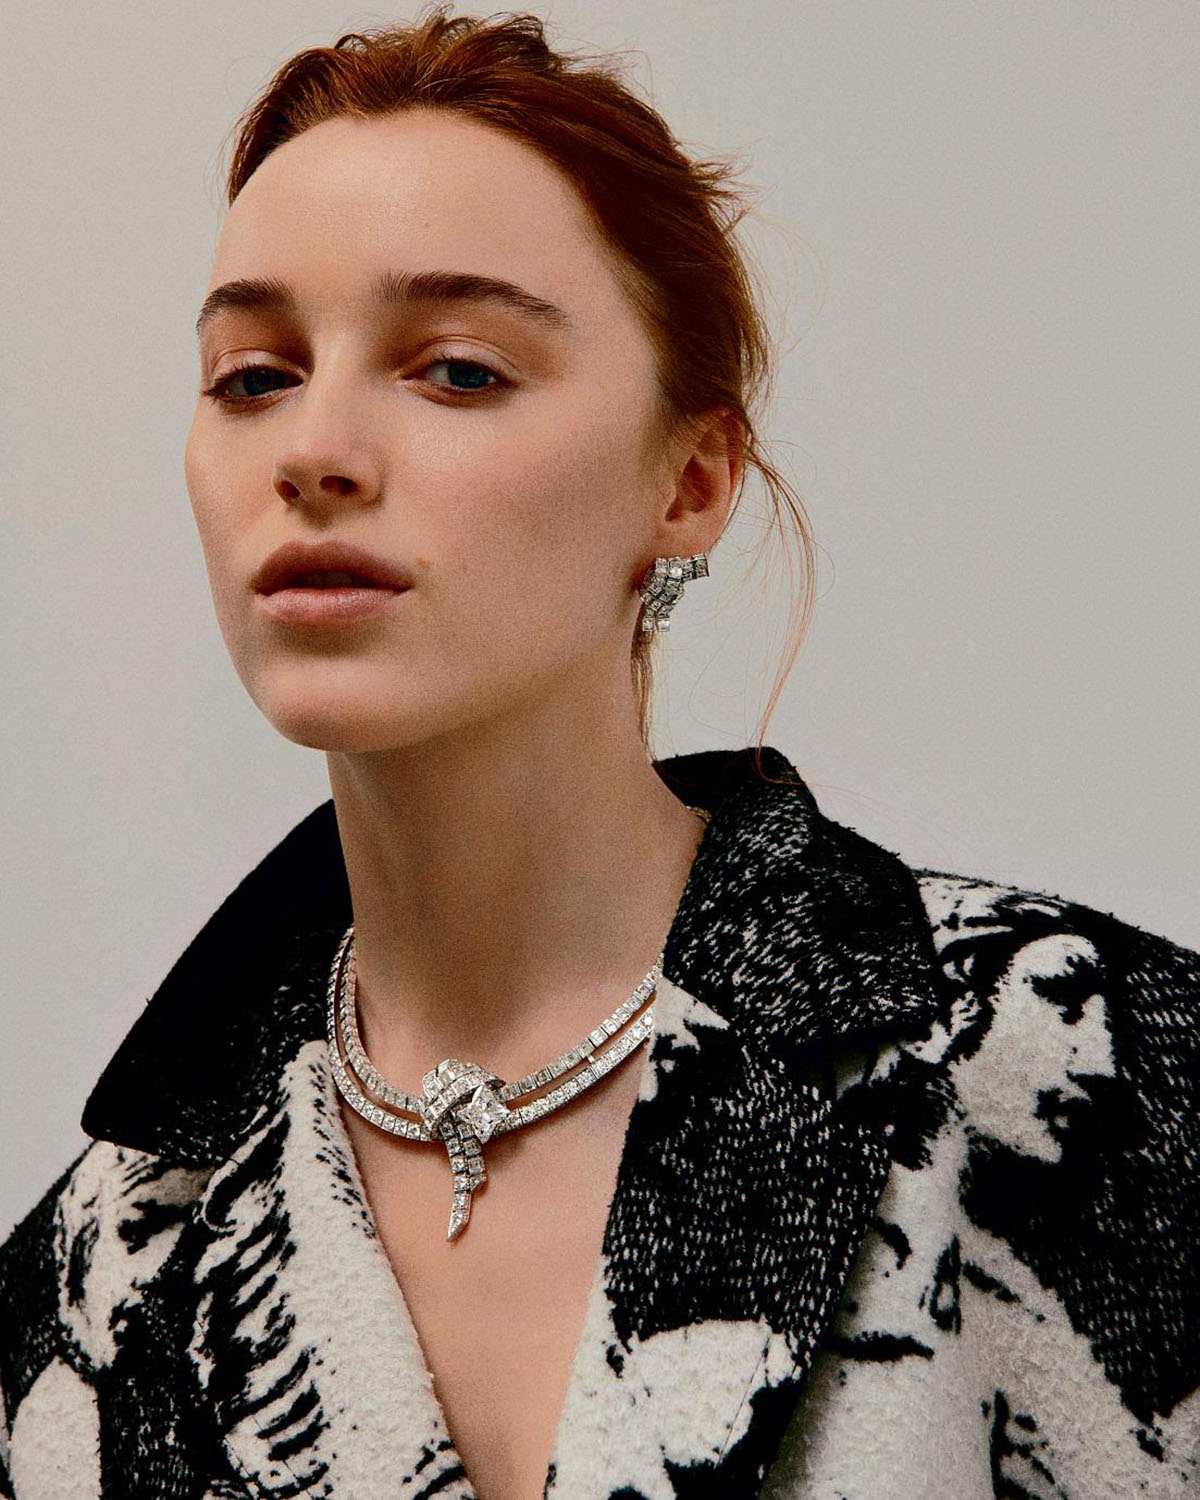 Phoebe Dynevor covers How To Spend It July 10th, 2021 by Thomas Lohr